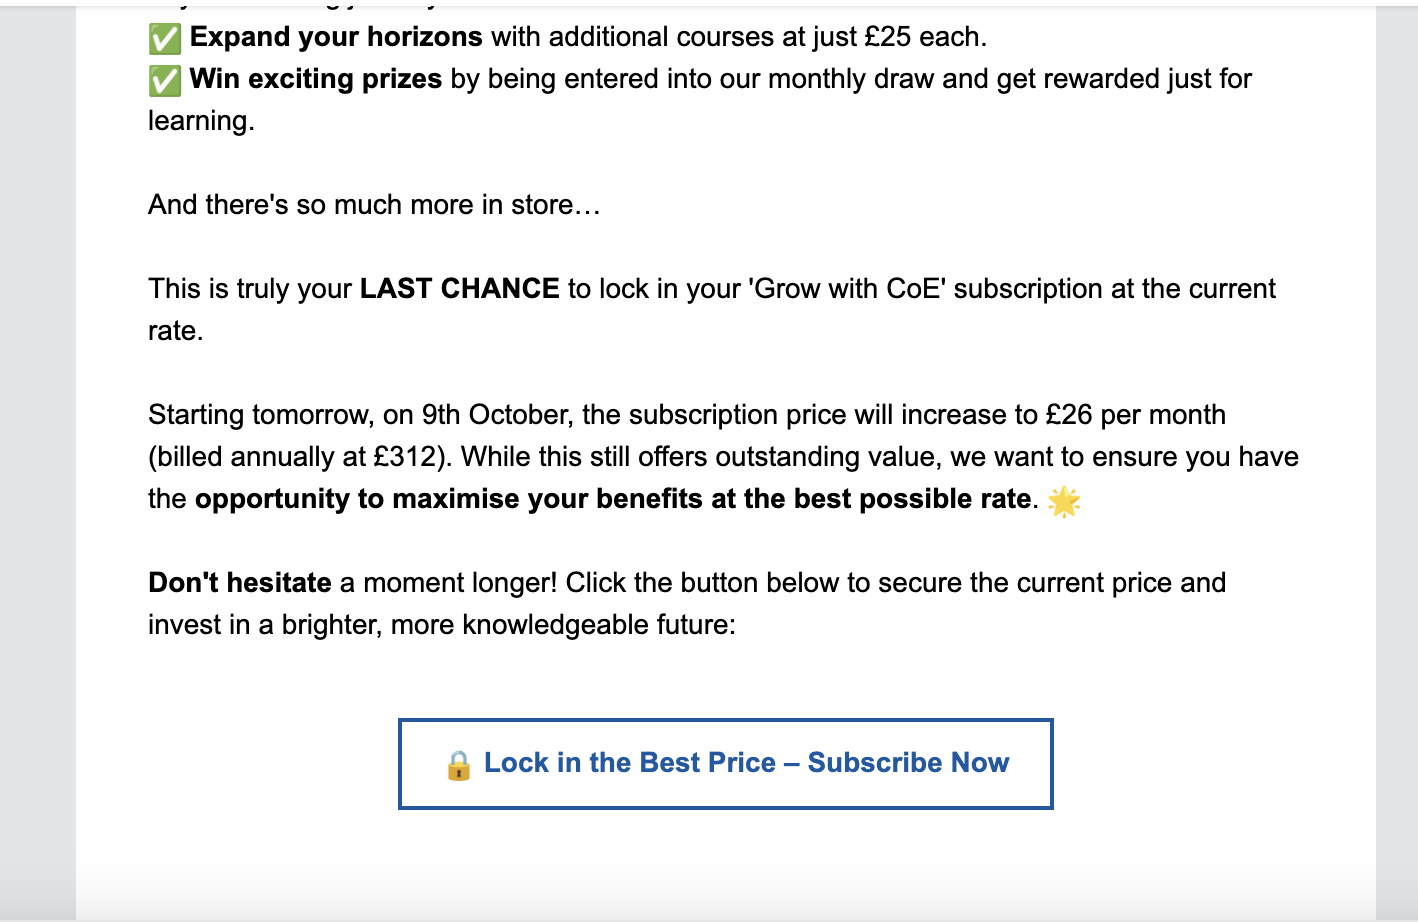 Email button example from Centre of Excellence 